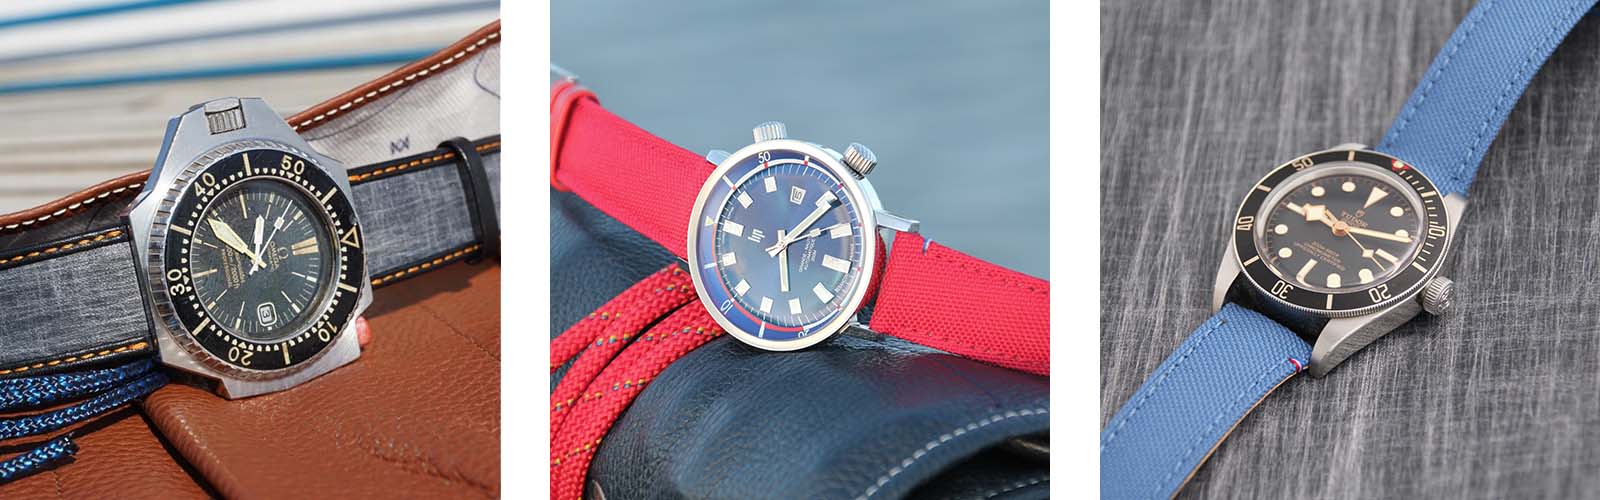 Grey, red and light blue colorful watch straps by Avel & Men